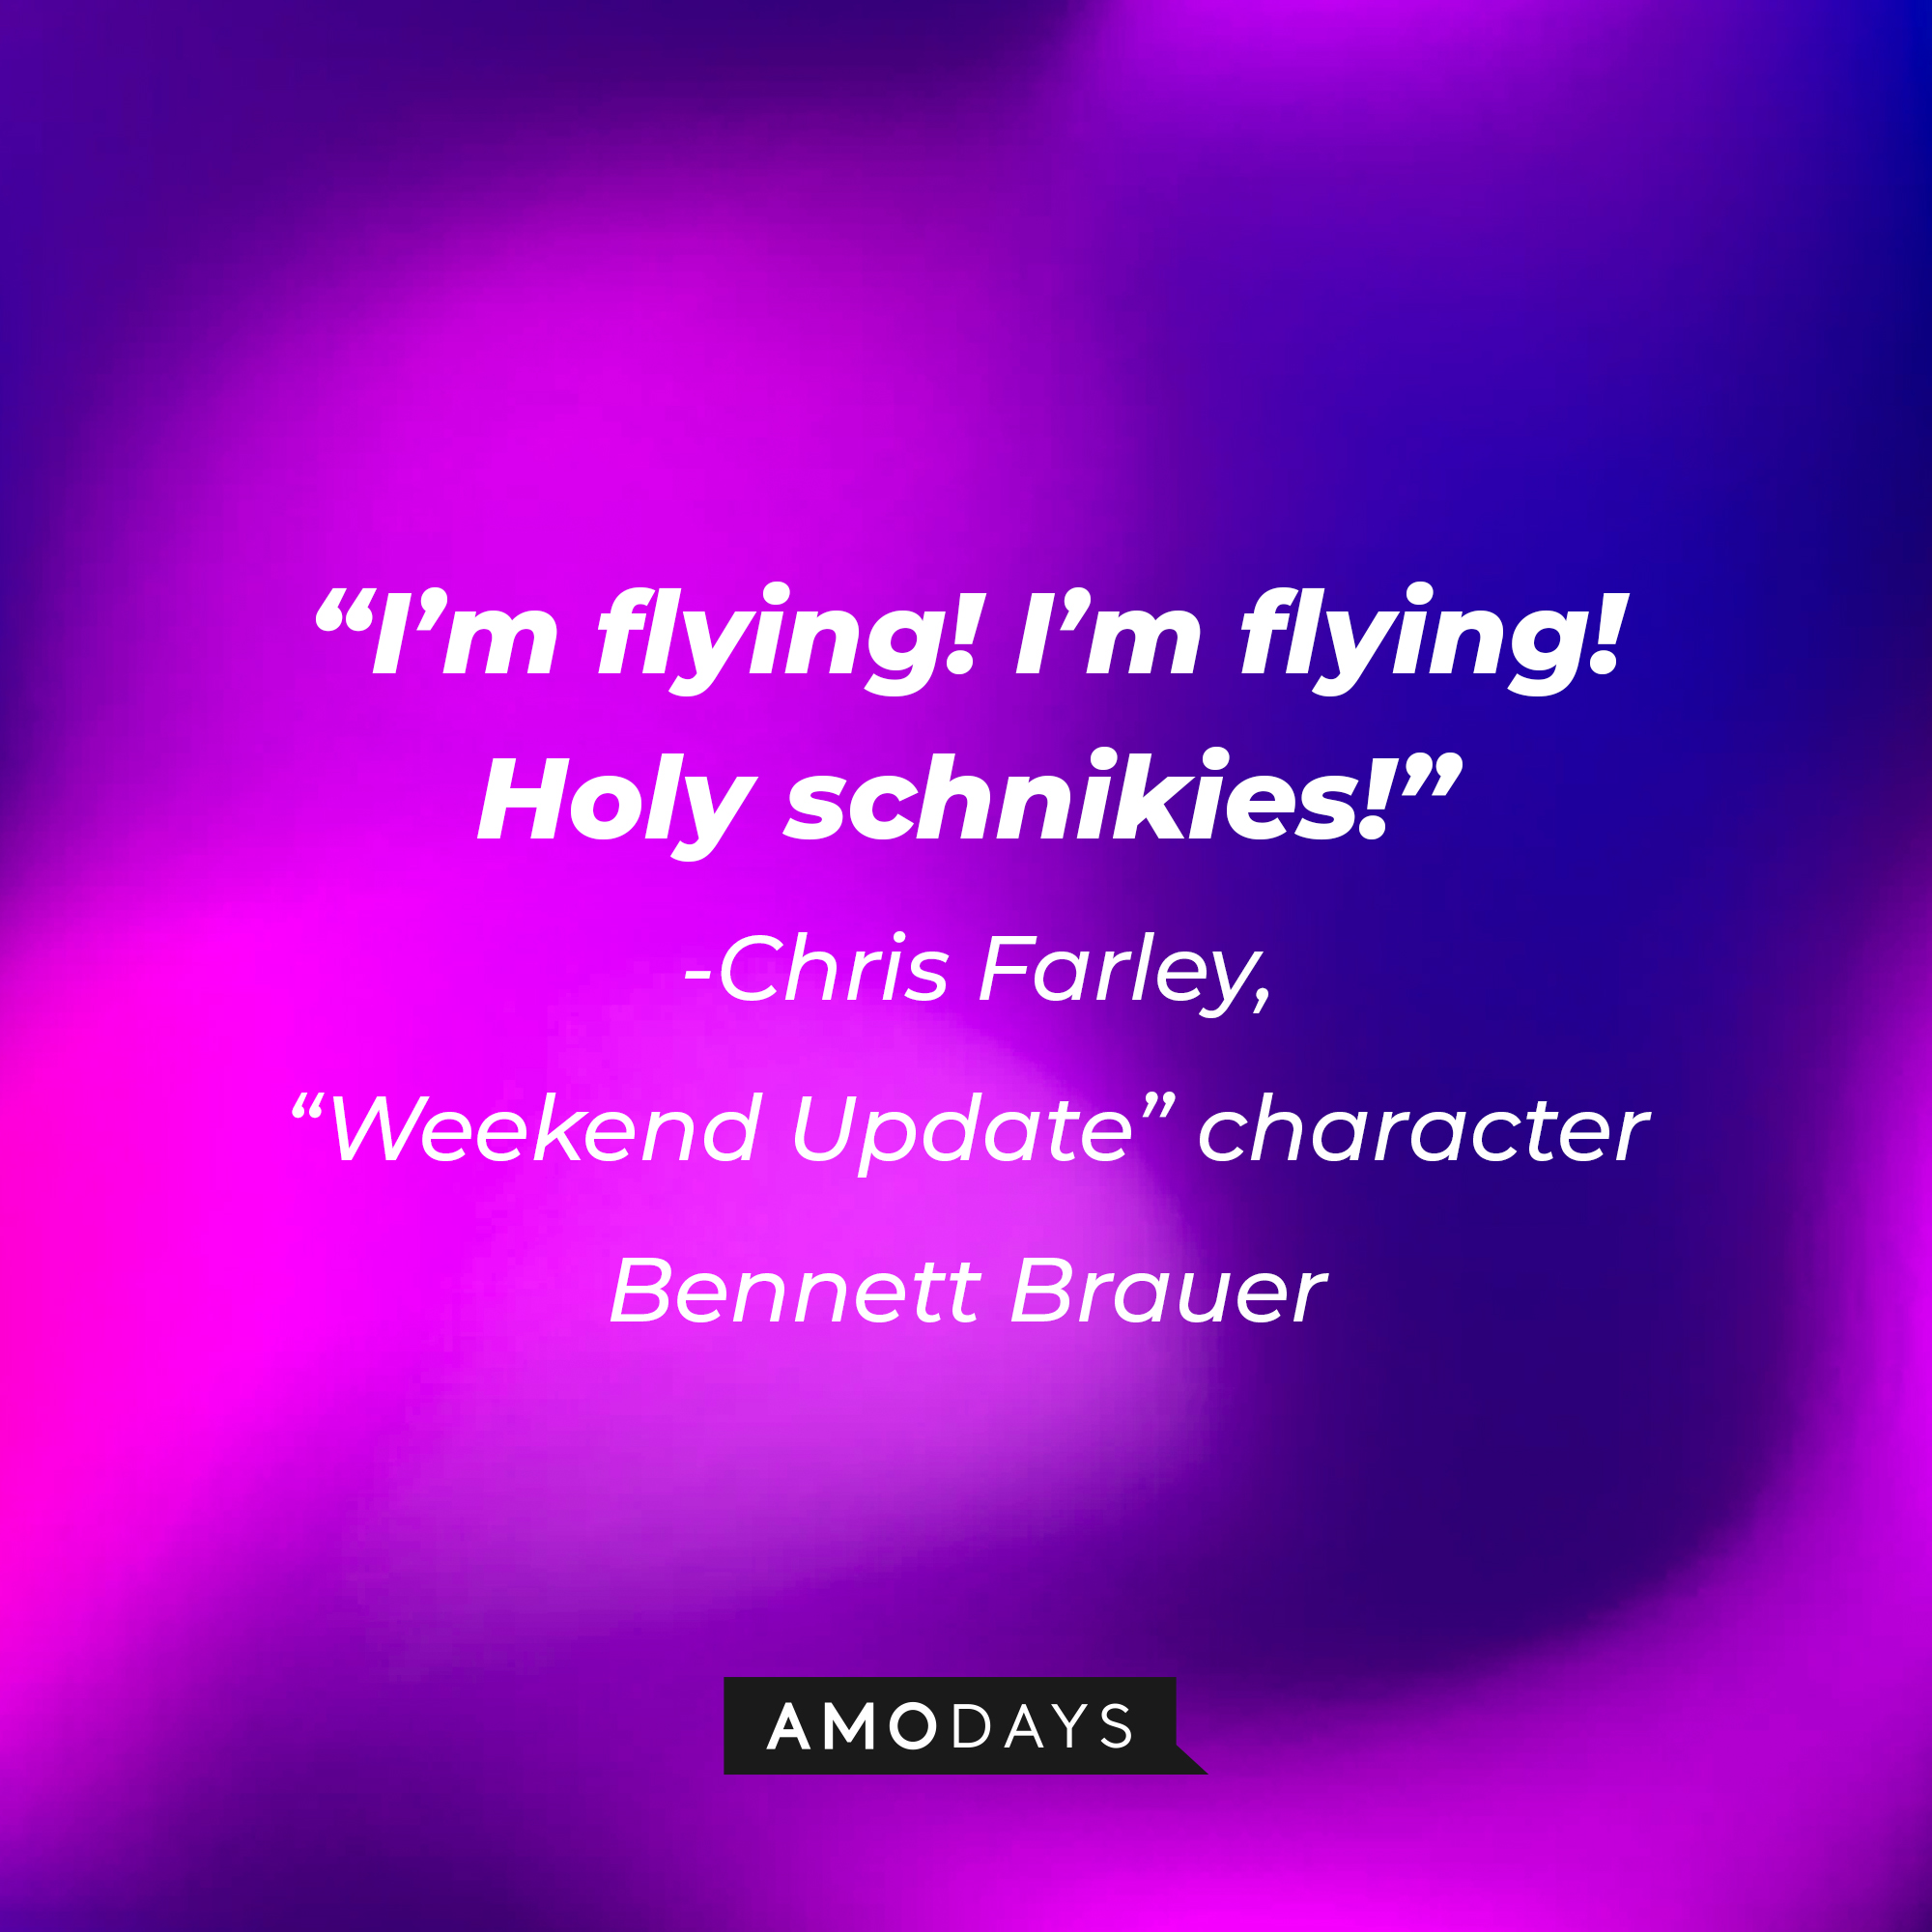 Chris Farley, “Weekend Update” character Bennett Brauer's quote: “I’m flying! I’m flying! Holy schnikies!" | Source: Amodays